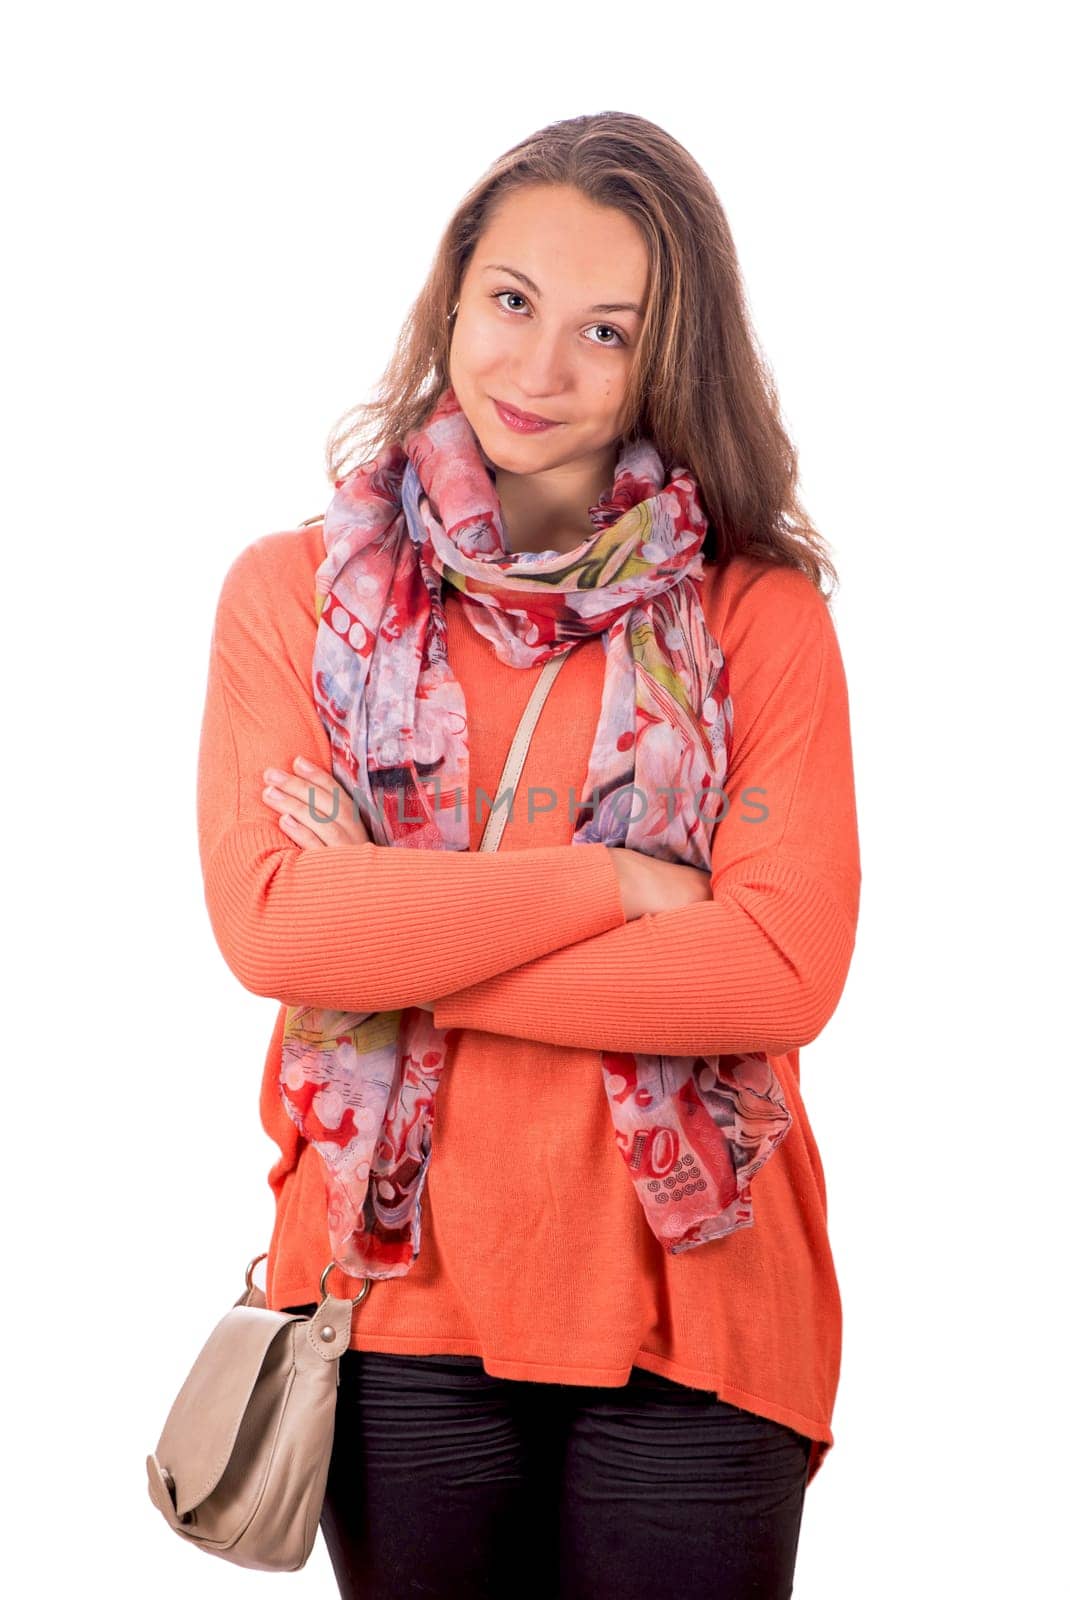 portrait of a pretty young girl in an orange sweater on a white background